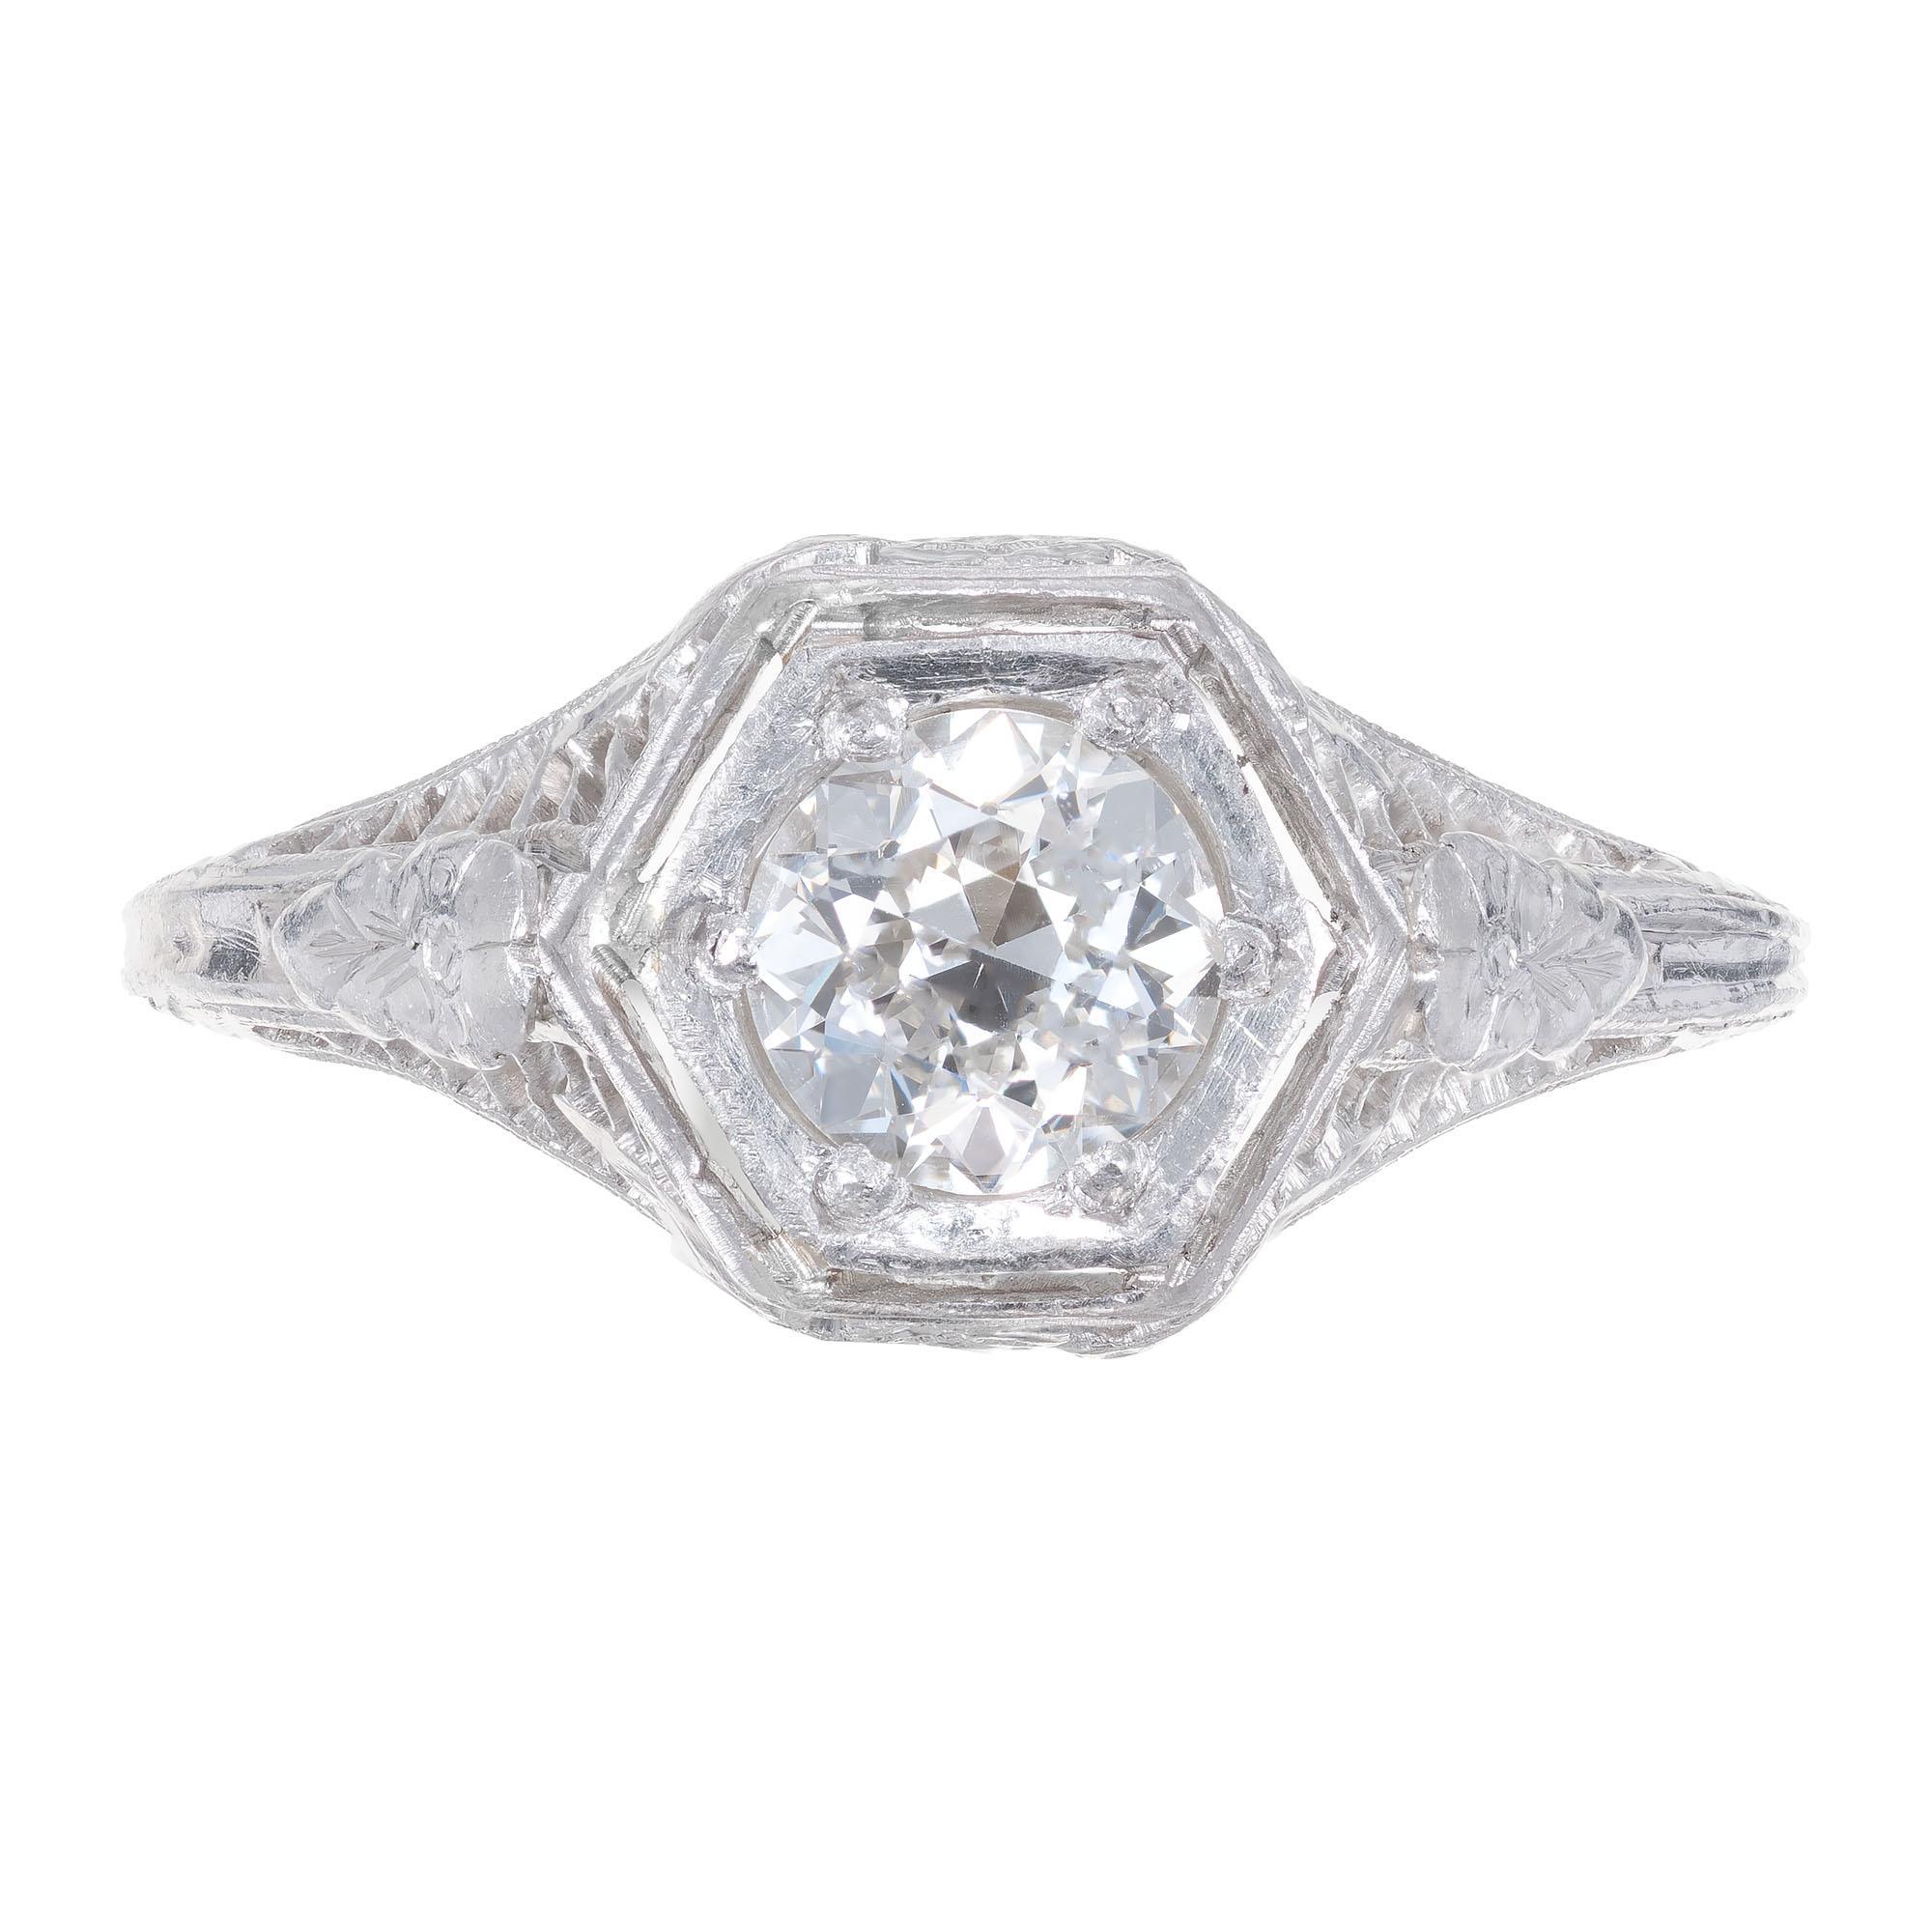 Vintage 1940's Art Deco filigree Diamond engagement ring with a transitional cut EGL certified center stone, in a platinum setting. 

1 transitional round Diamond, approx. total weight .52cts, F – G, SI1, EGL certificate # US313766803D
Size 5 and